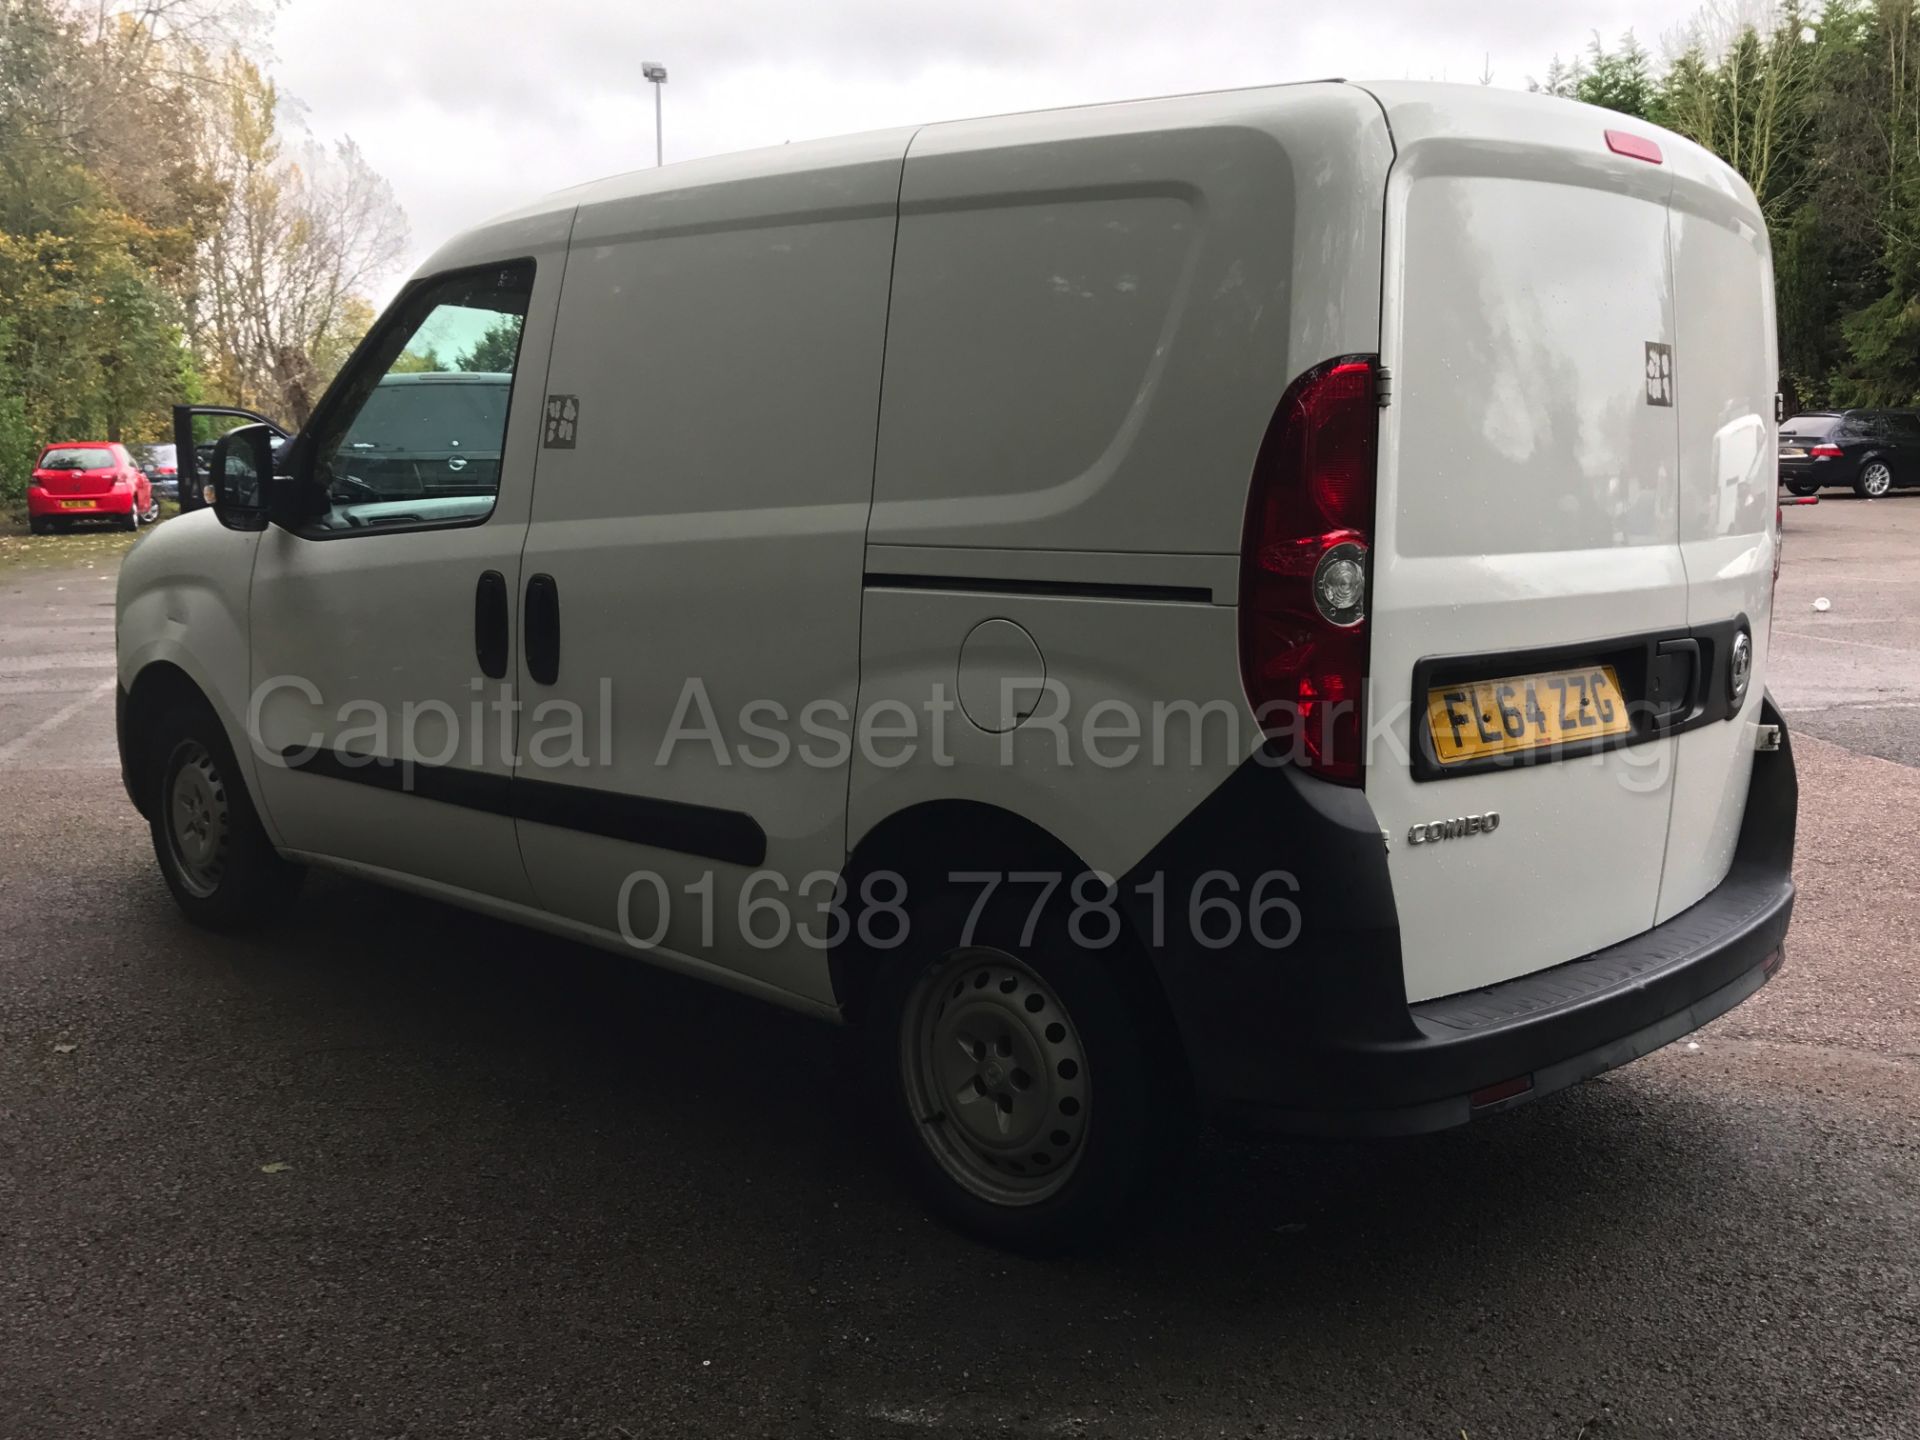 VAUXHALL COMBO 2000 L1H1 (2015 MODEL) 'CDTI - 90 BHP' (1 FORMER COMPANY OWNER FROM NEW) *50 MPG+* - Image 6 of 25